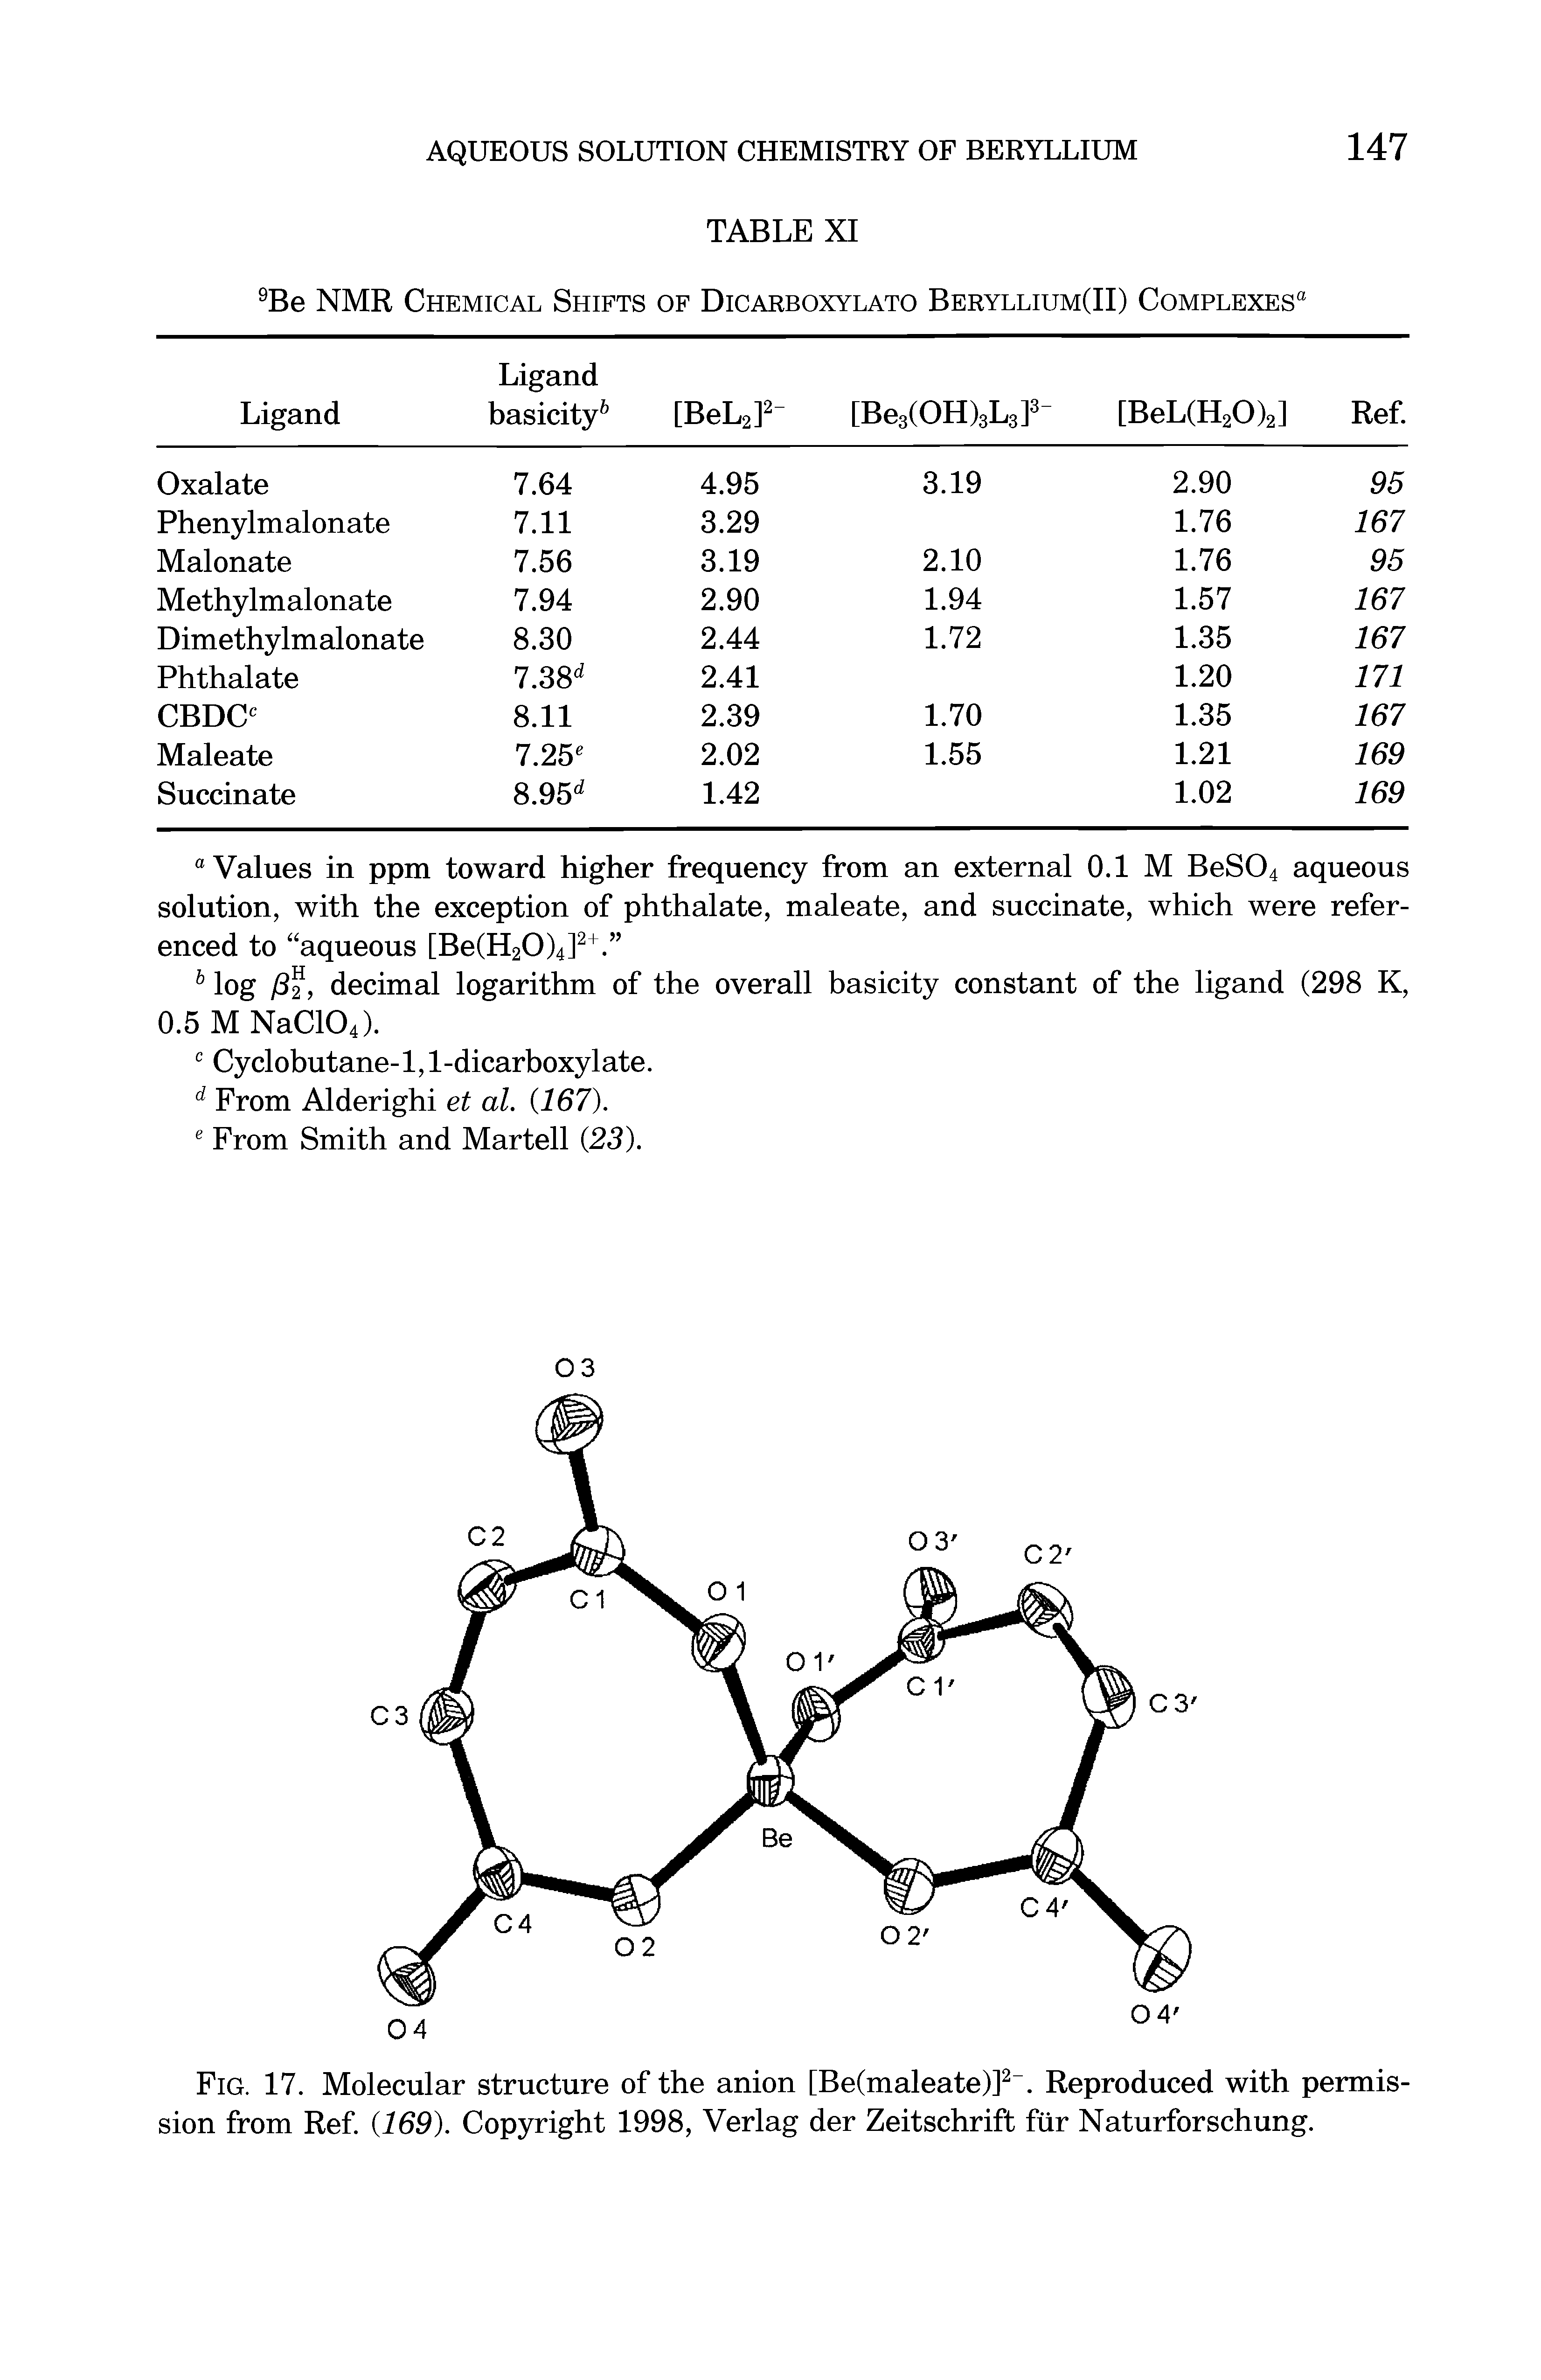 Fig. 17. Molecular structure of the anion [Be(maleate)F. Reproduced with permission from Ref (169). Copyright 1998, Verlag der Zeitschrift fiir Naturforschung.